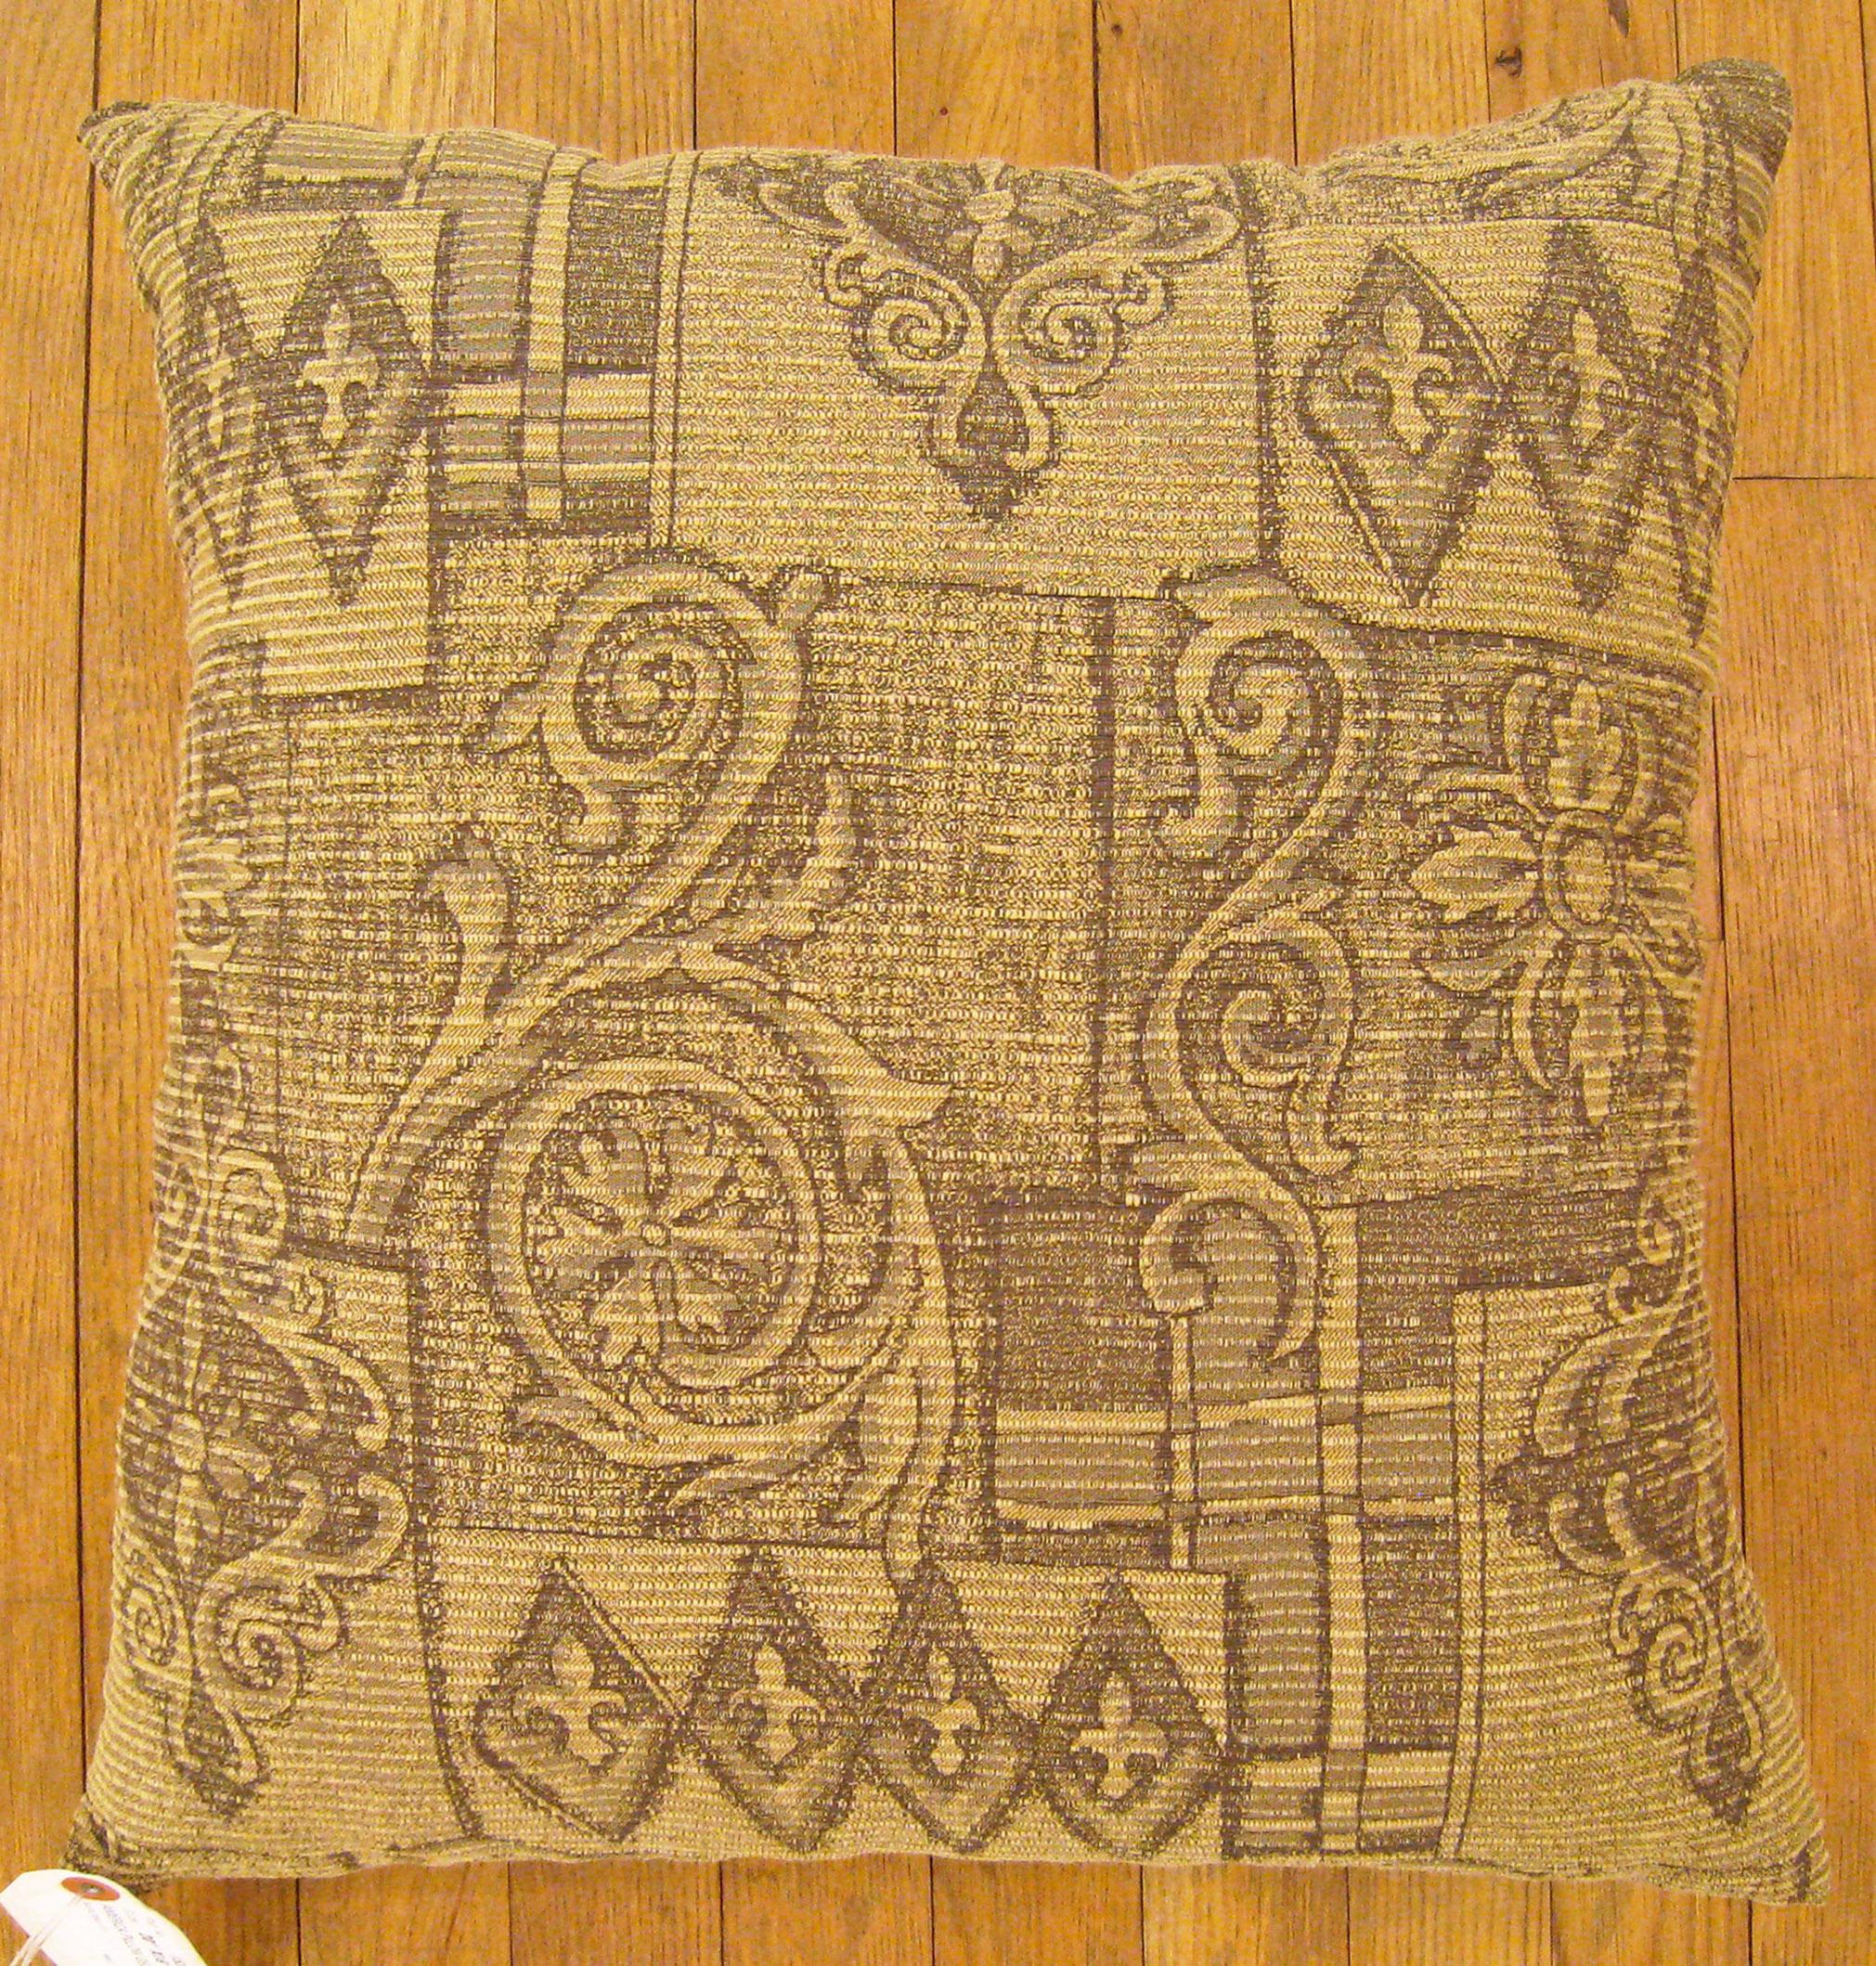 Vintage Floro-geometric Fabric pillow; size 1'8” x 1'6”.

A vintage american pillow with geometric abstracts in a beige central field, size 1'8” x 1'6”. This lovely decorative pillow features a vintage fabric of a American floro-geometric style on